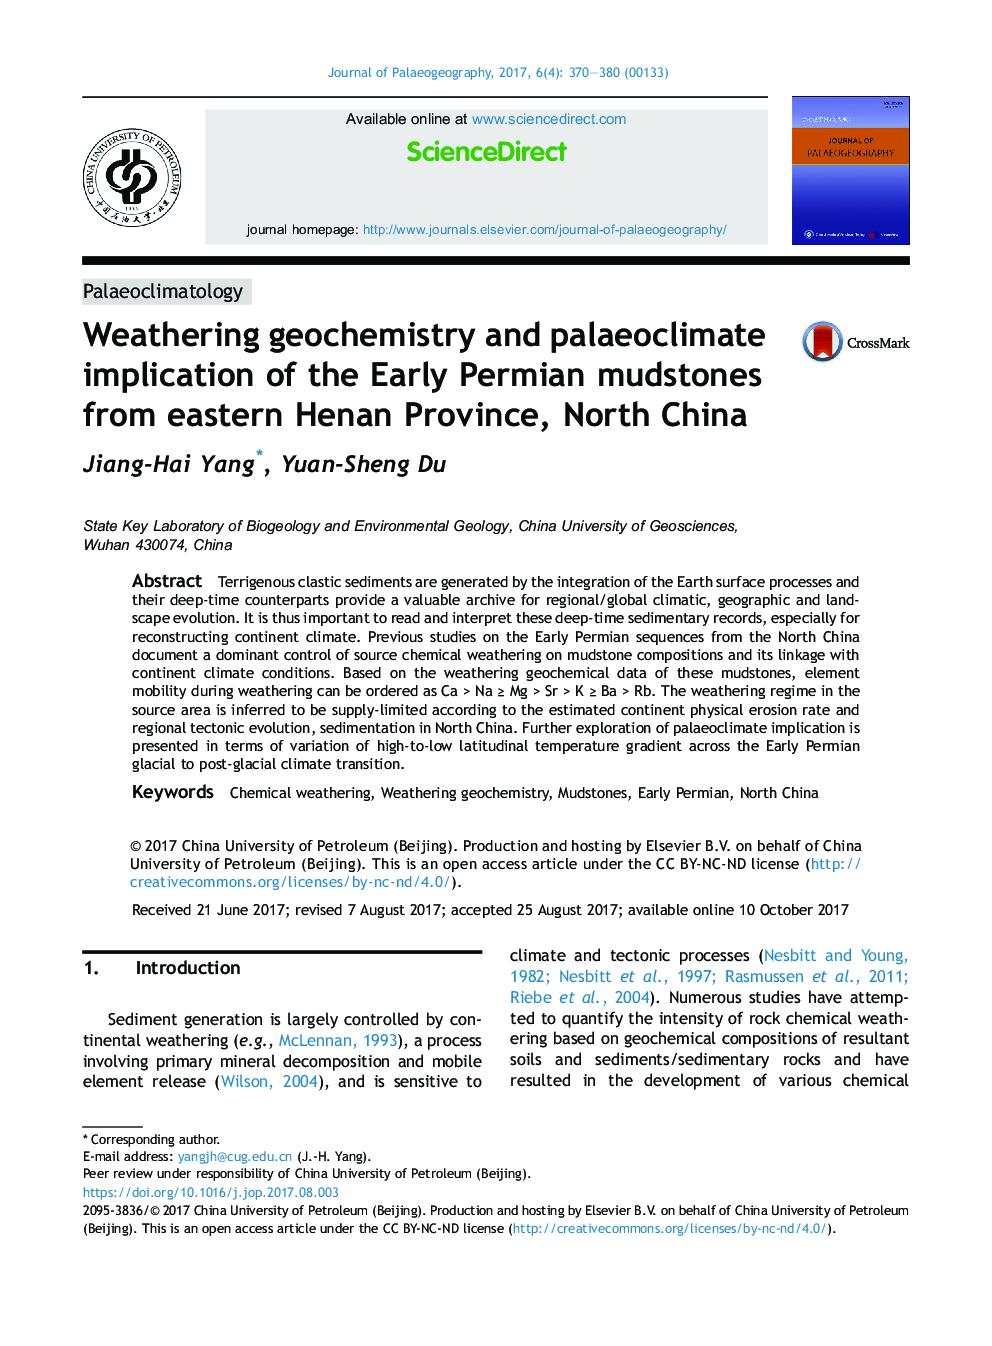 Weathering geochemistry and palaeoclimate implication of the Early Permian mudstones from eastern Henan Province, North China